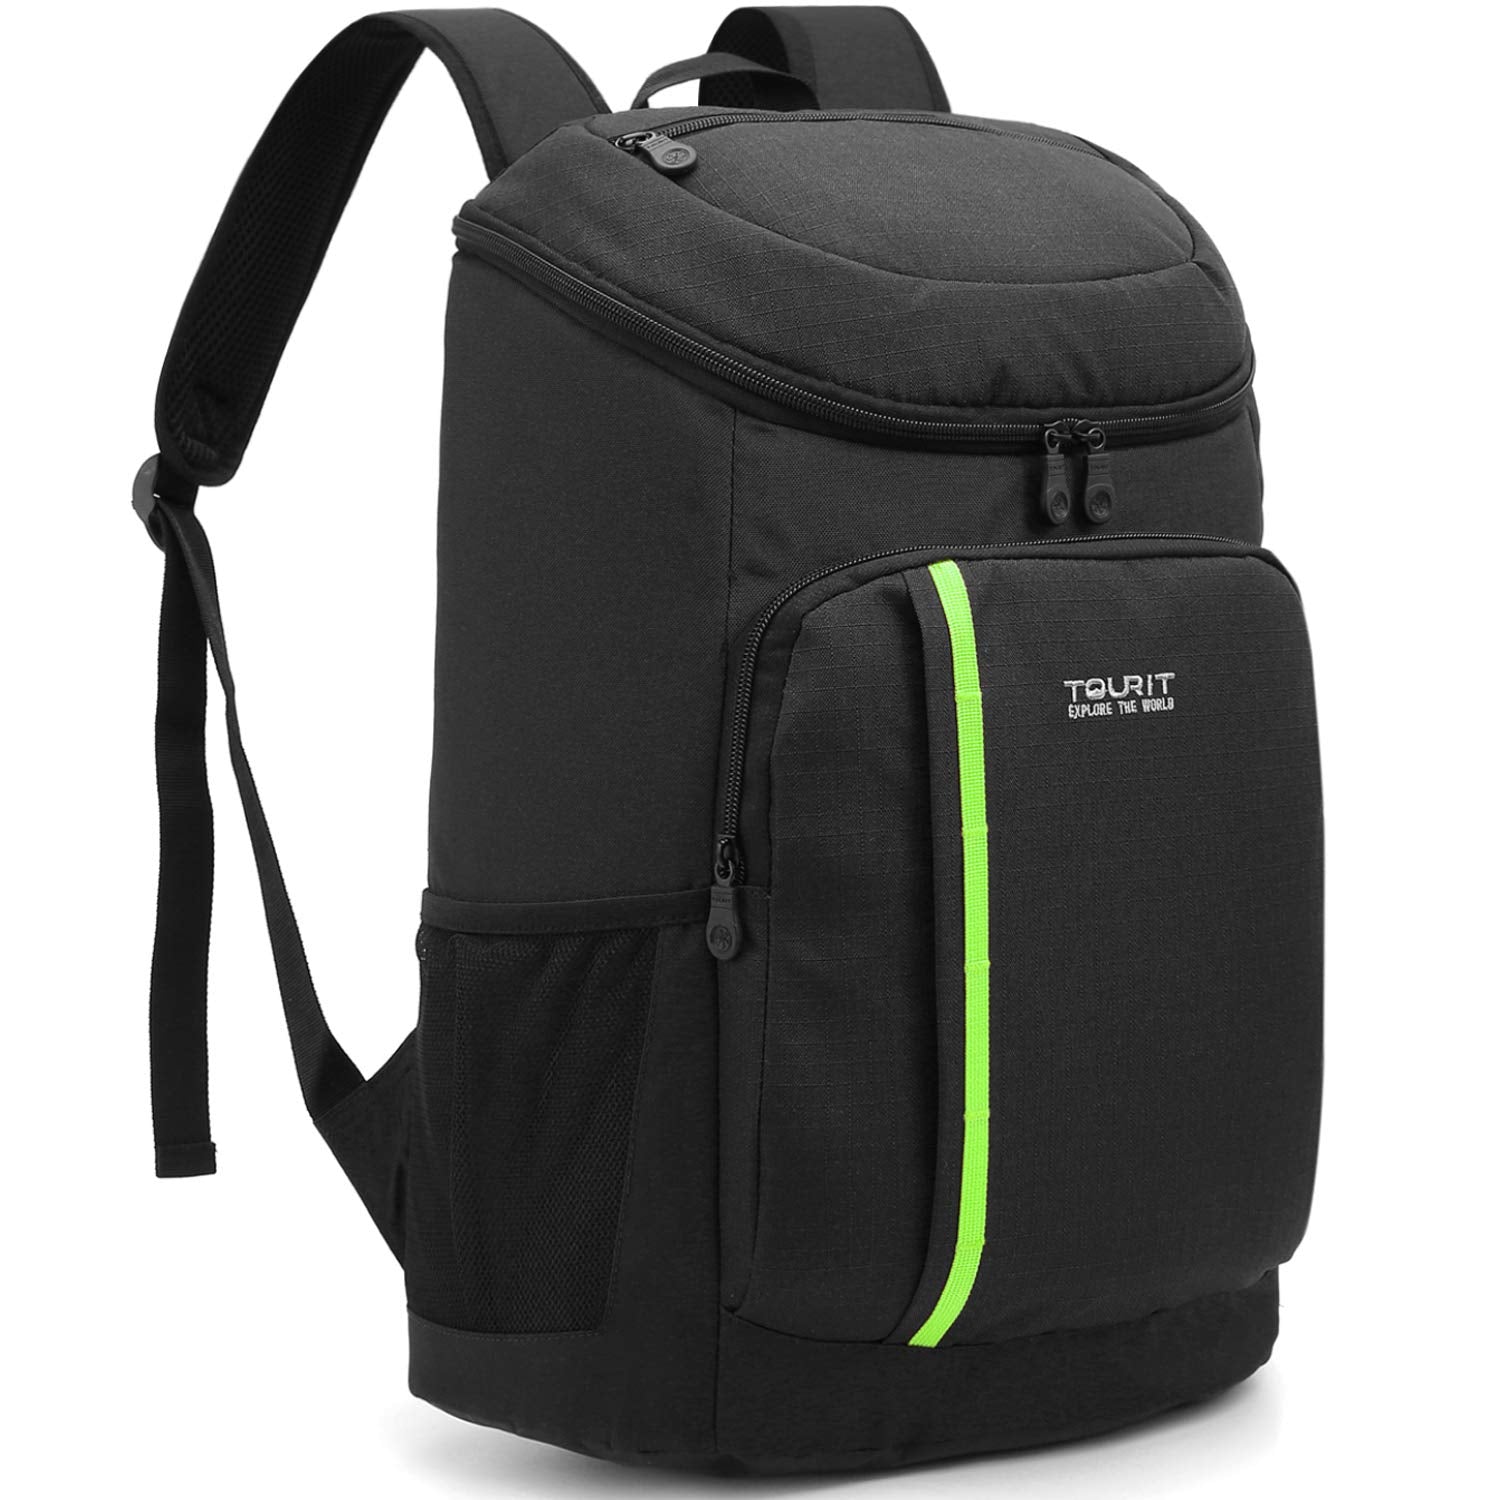 TOURIT Cooler Backpack 30 Cans Lightweight Insulated Backpack Cooler Leak-Proof Soft Cooler Bag Large Capacity for Men Women to Picnics, Camping, Hiking, Beach, Park or Day Trips